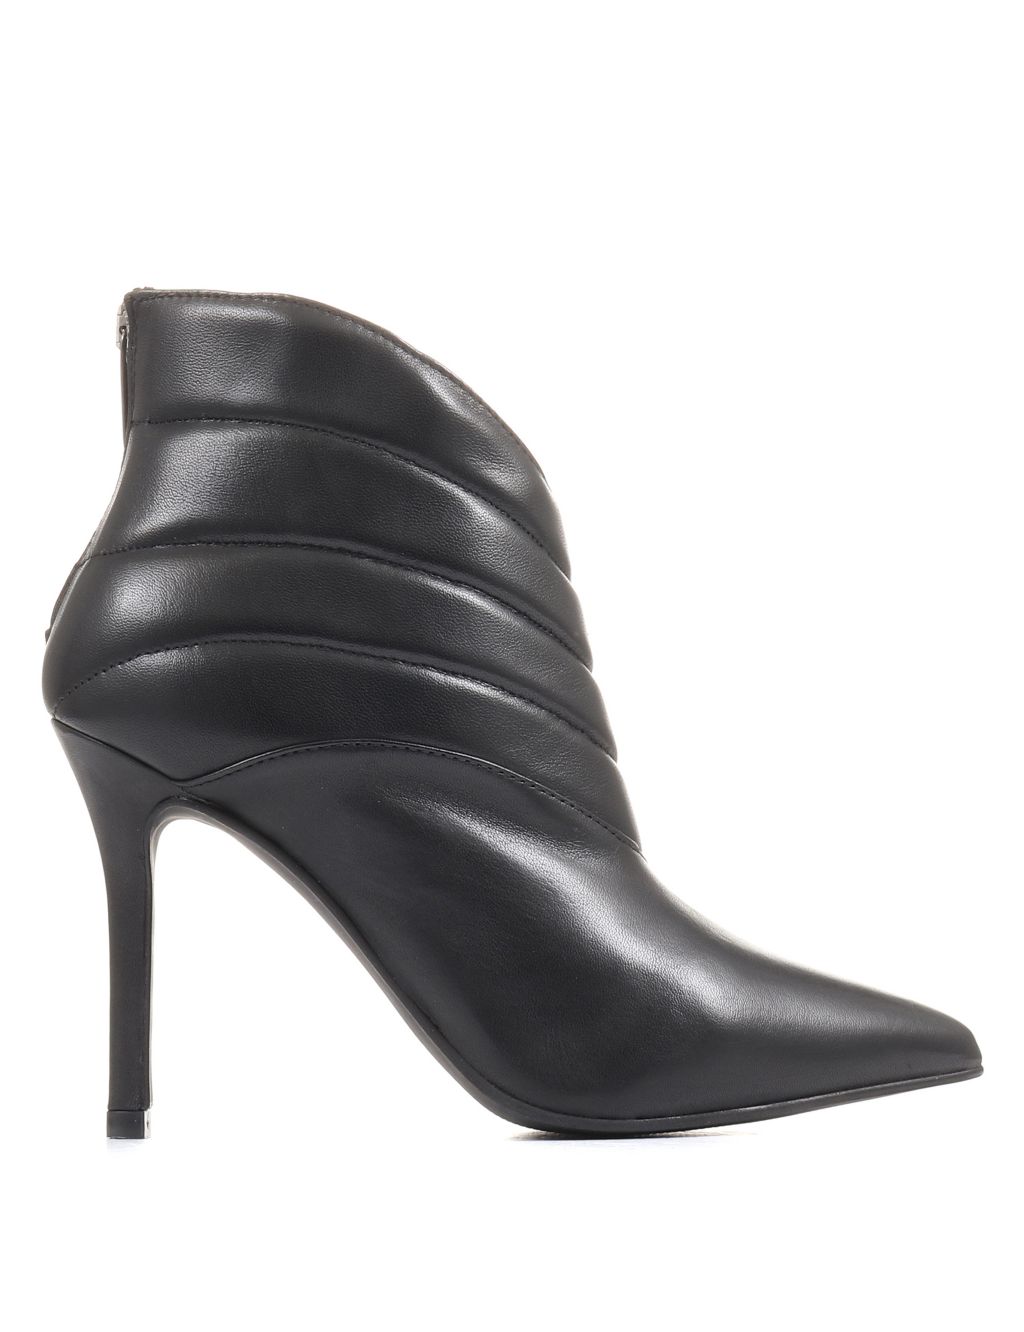 Leather Stiletto Heel Pointed Ankle Boots